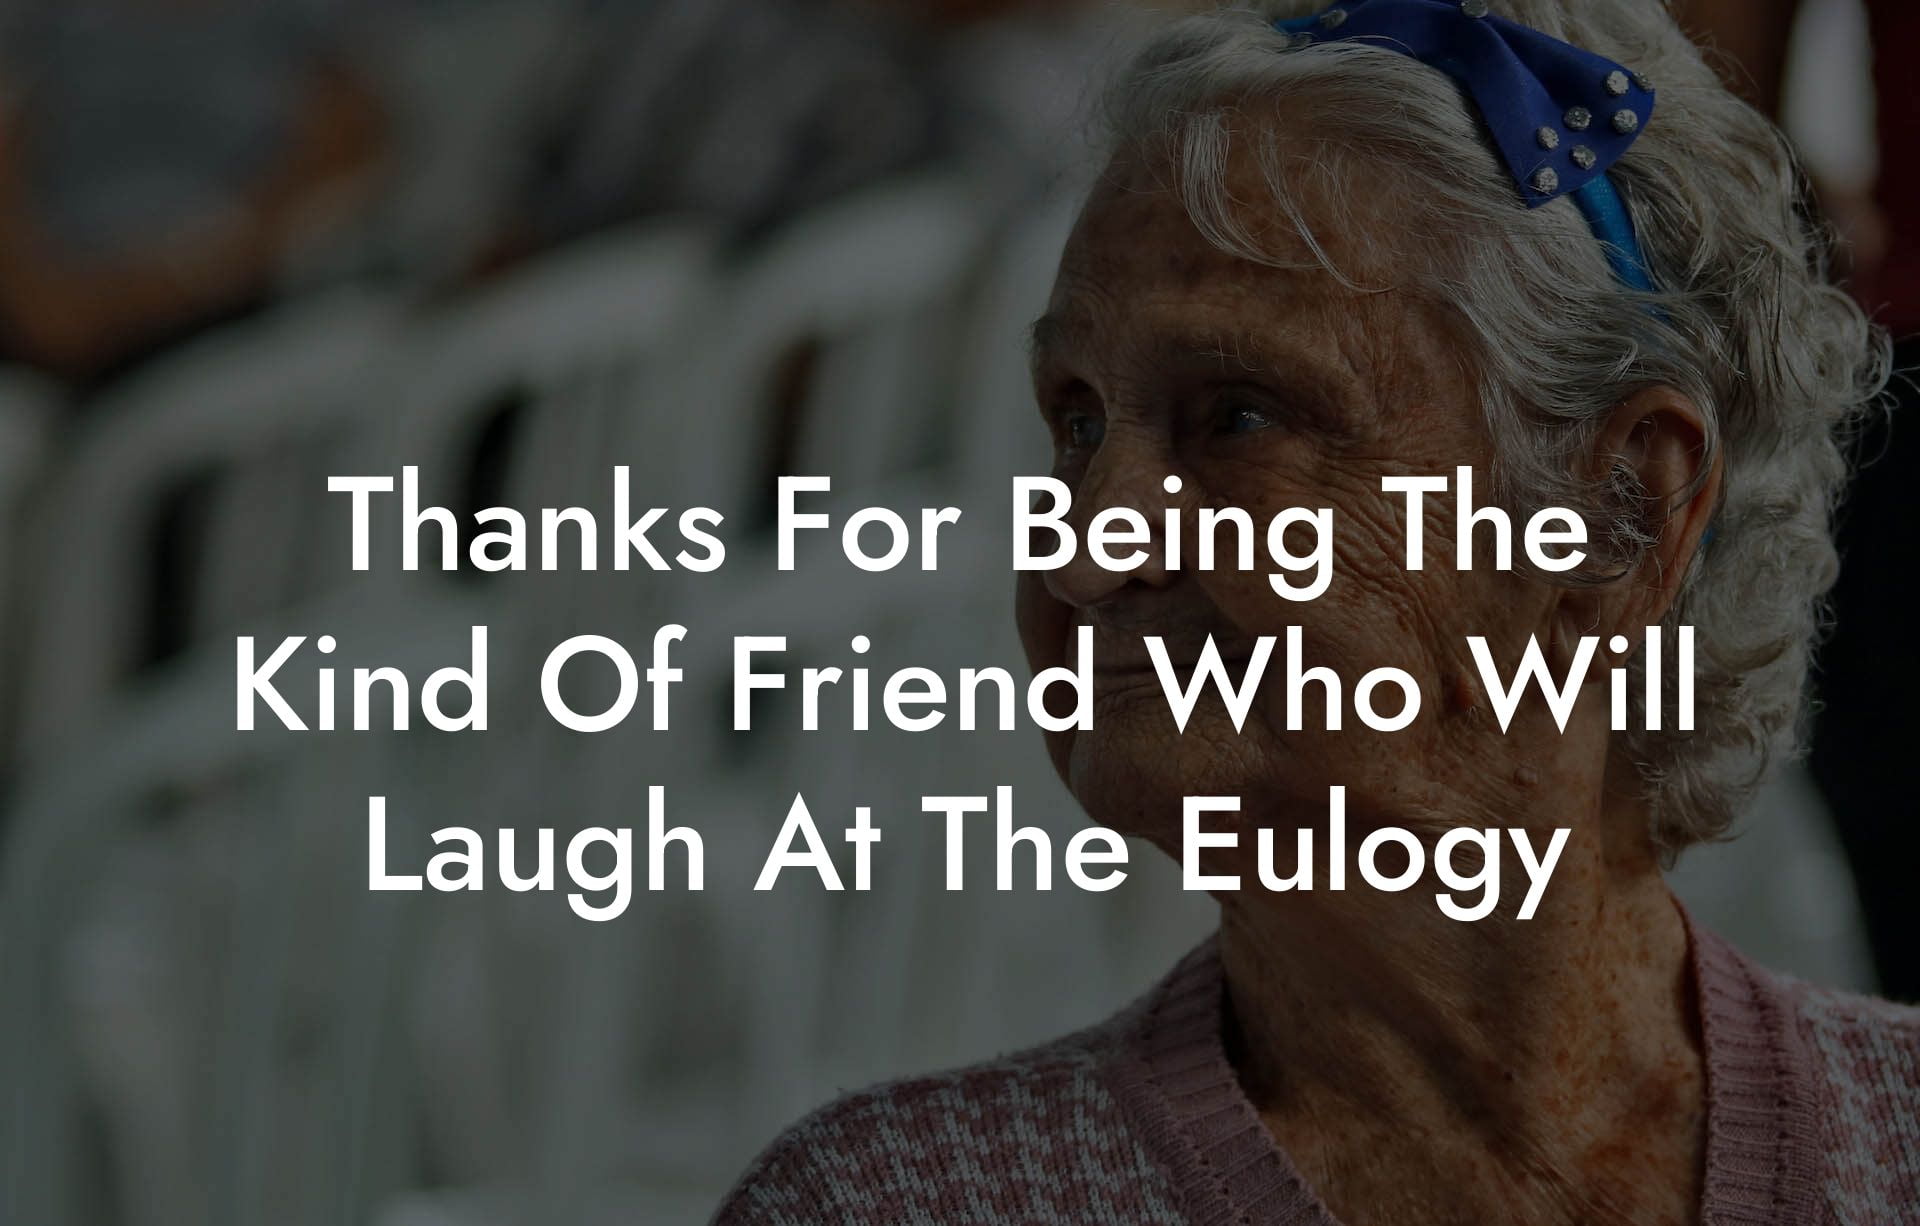 Thanks For Being The Kind Of Friend Who Will Laugh At The Eulogy